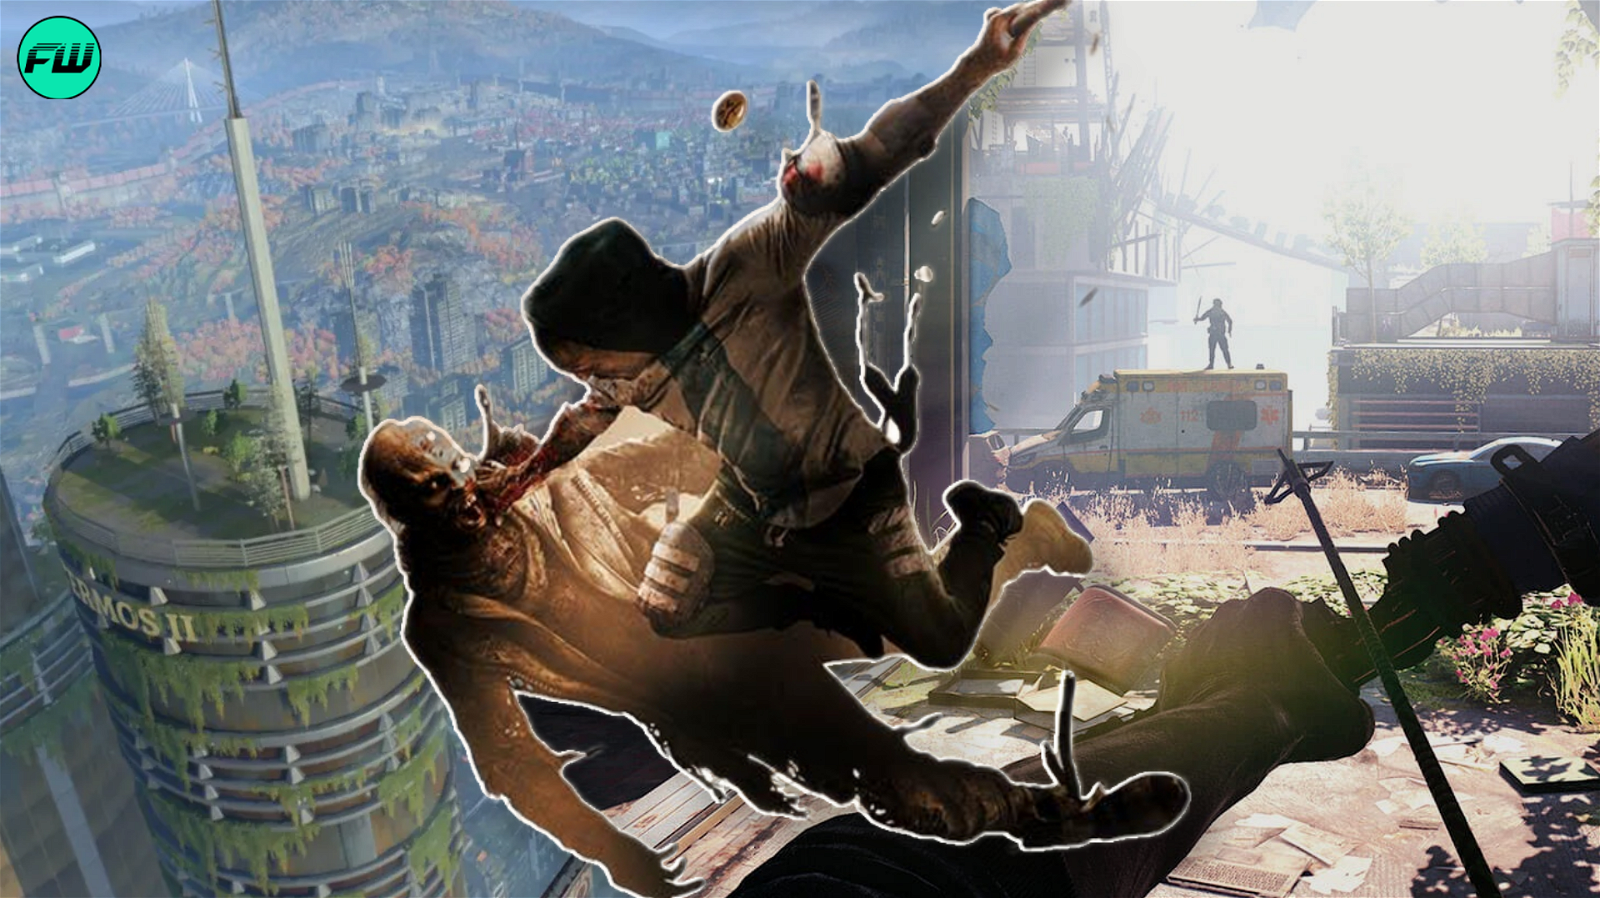 5 Things Dying Light 2 Does Better than the Original